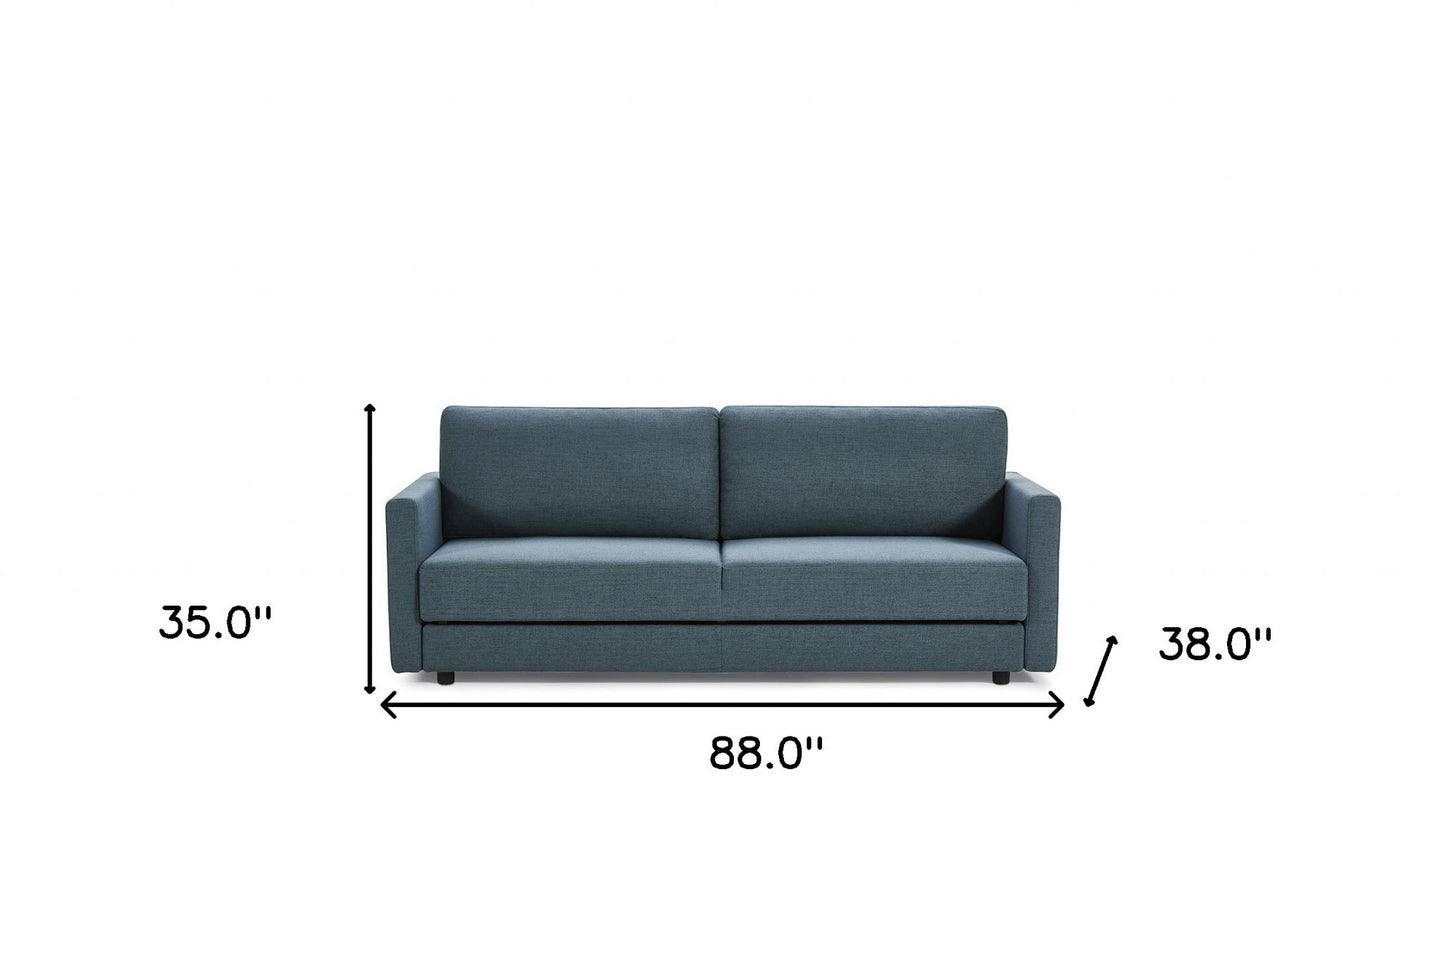 Long Arm 88" Blue Green Sofa Bed With Storage Space